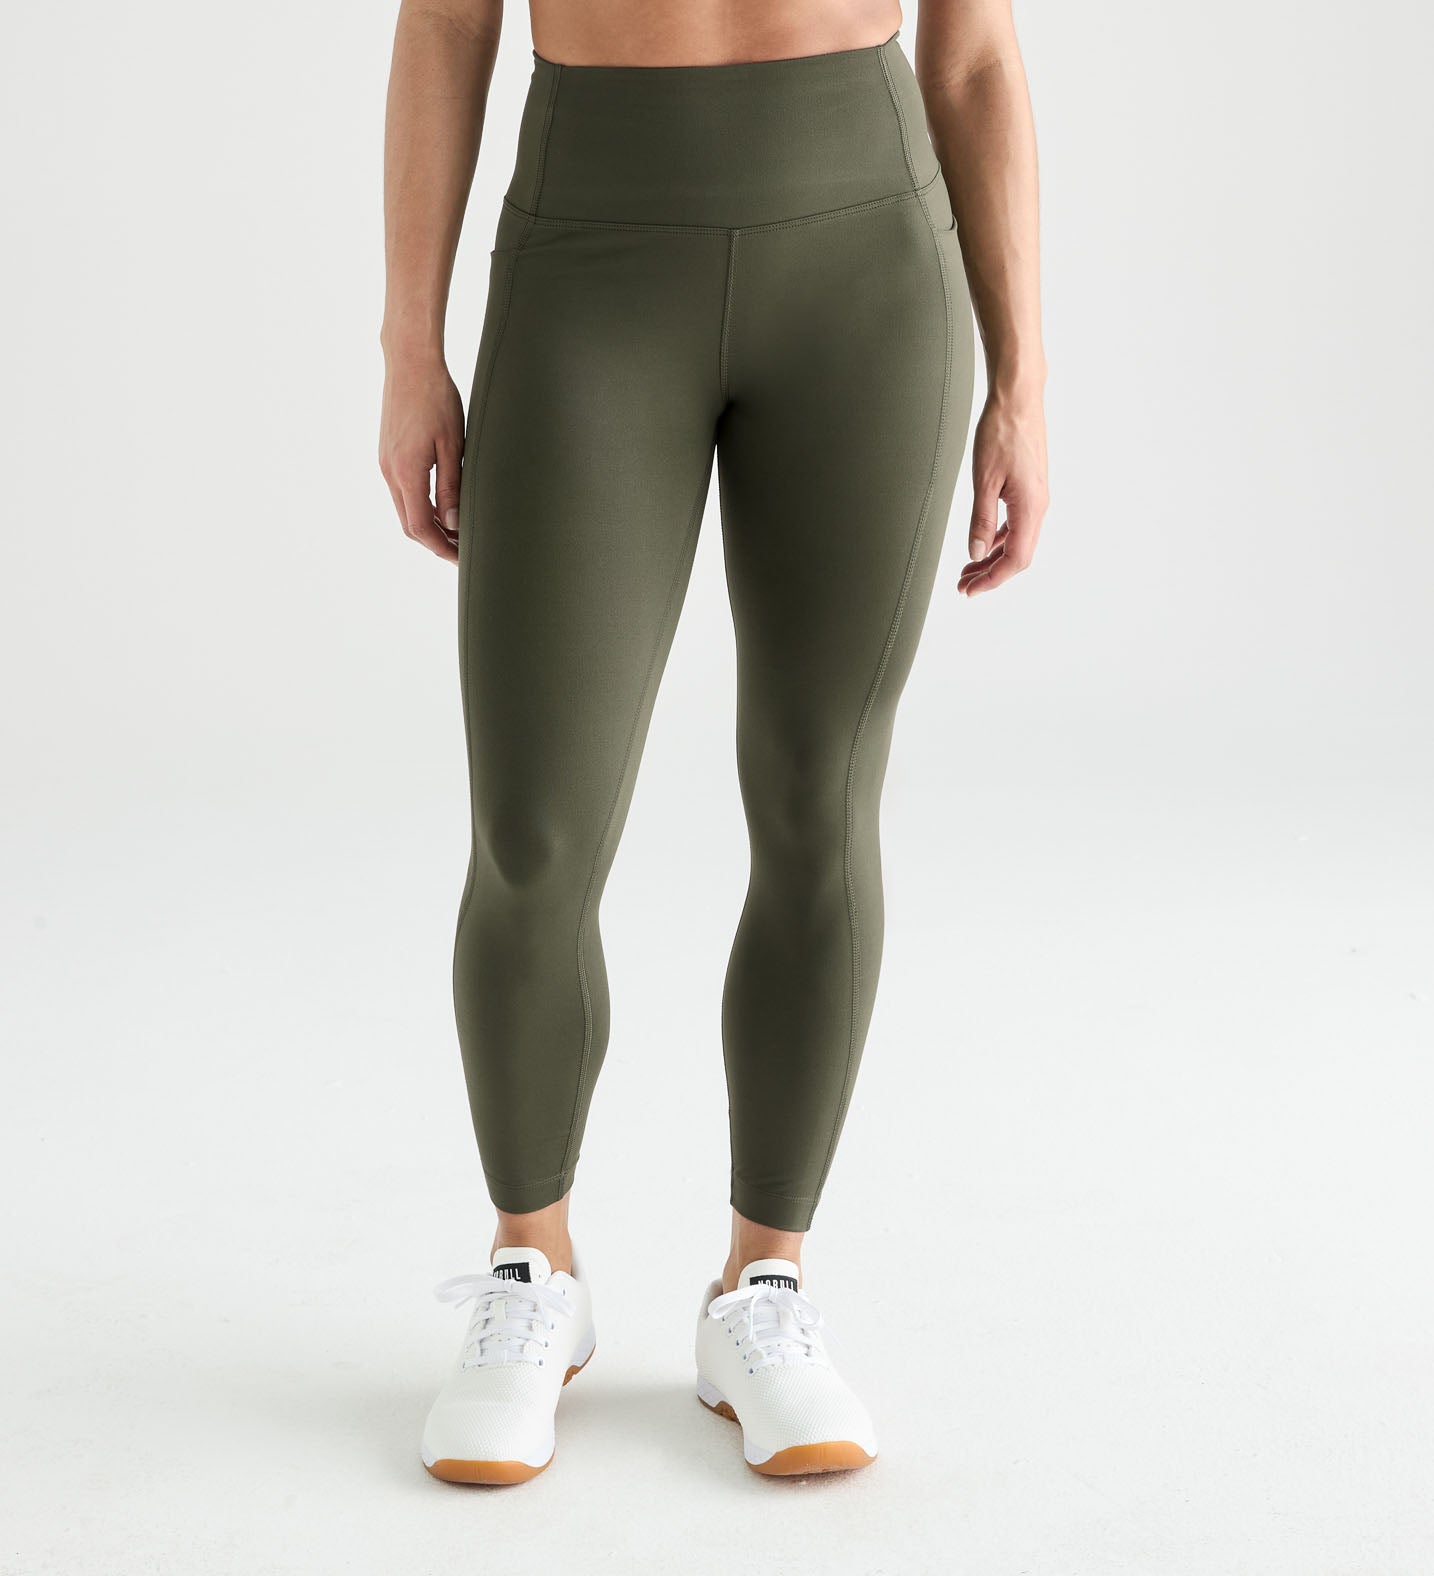 Lululemon In Movement tight 25” size 2 - Women's Clothing & Shoes